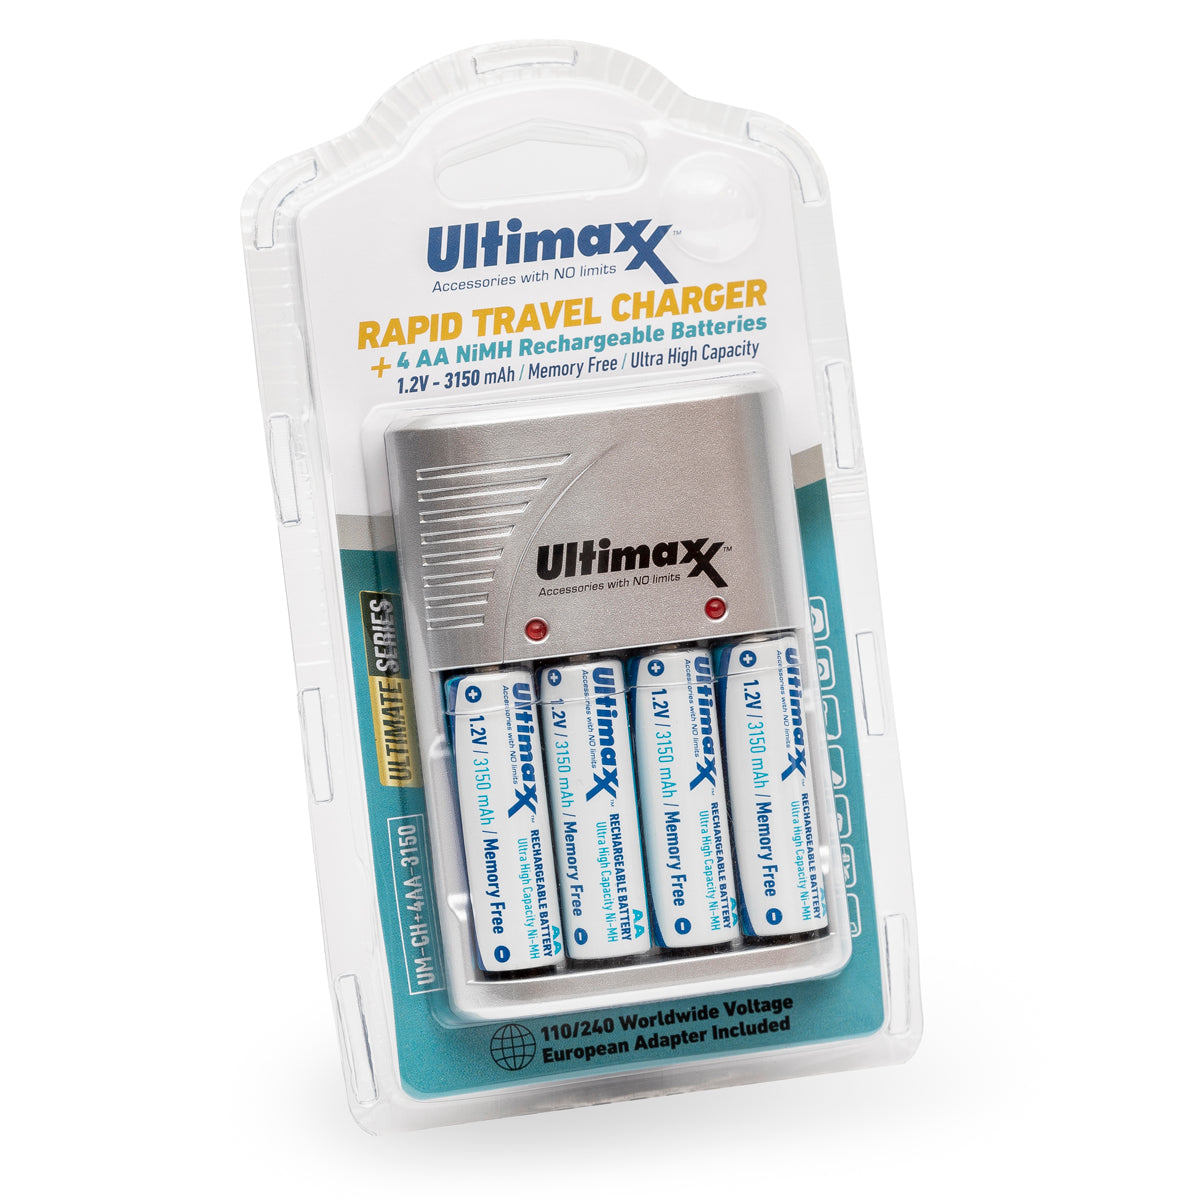 4X Rechargeable 3150mAh Ultra High Capacity AA NiMH Batteries with Charger